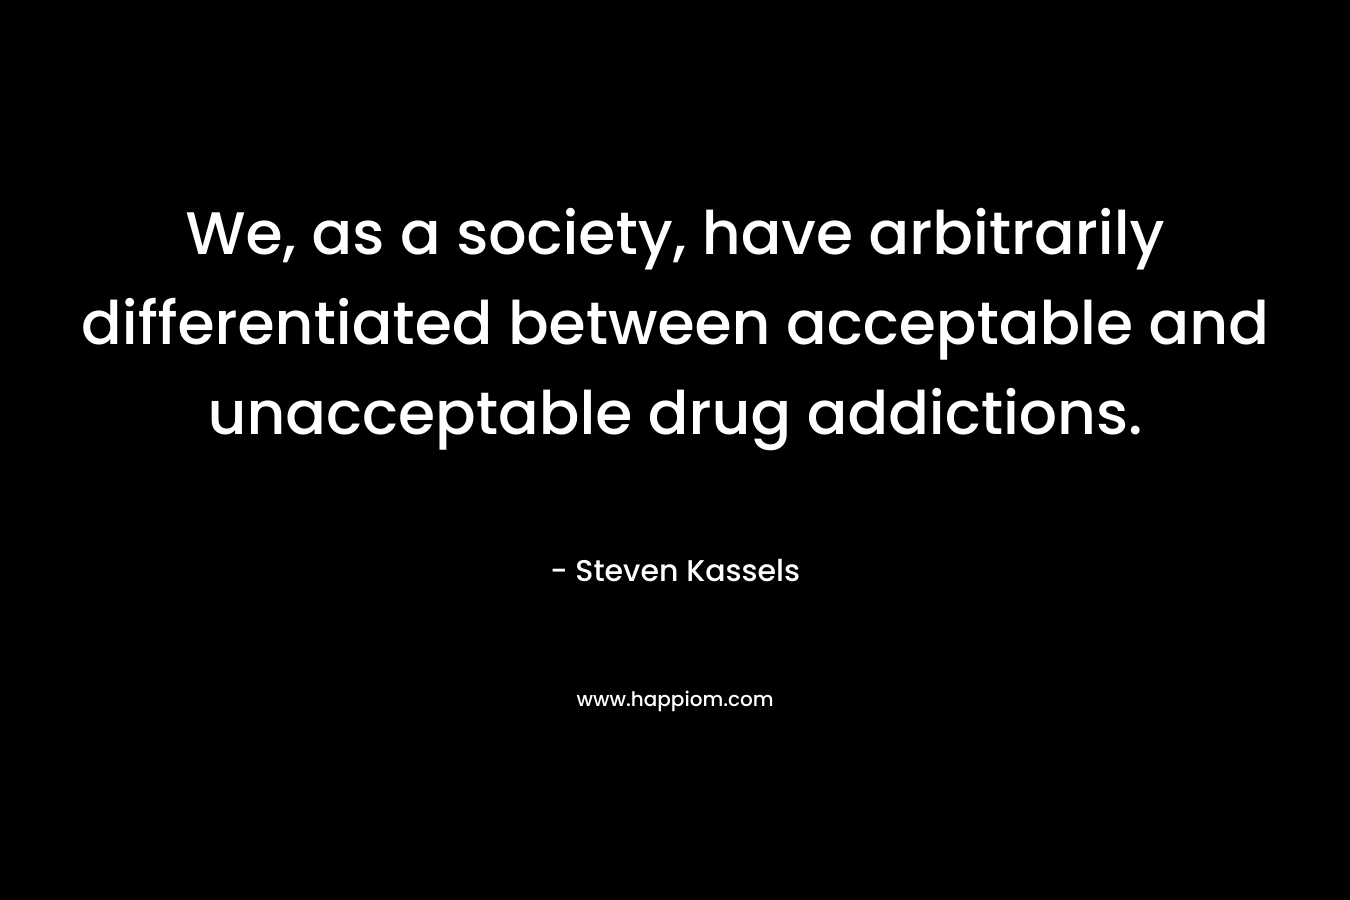 We, as a society, have arbitrarily differentiated between acceptable and unacceptable drug addictions.